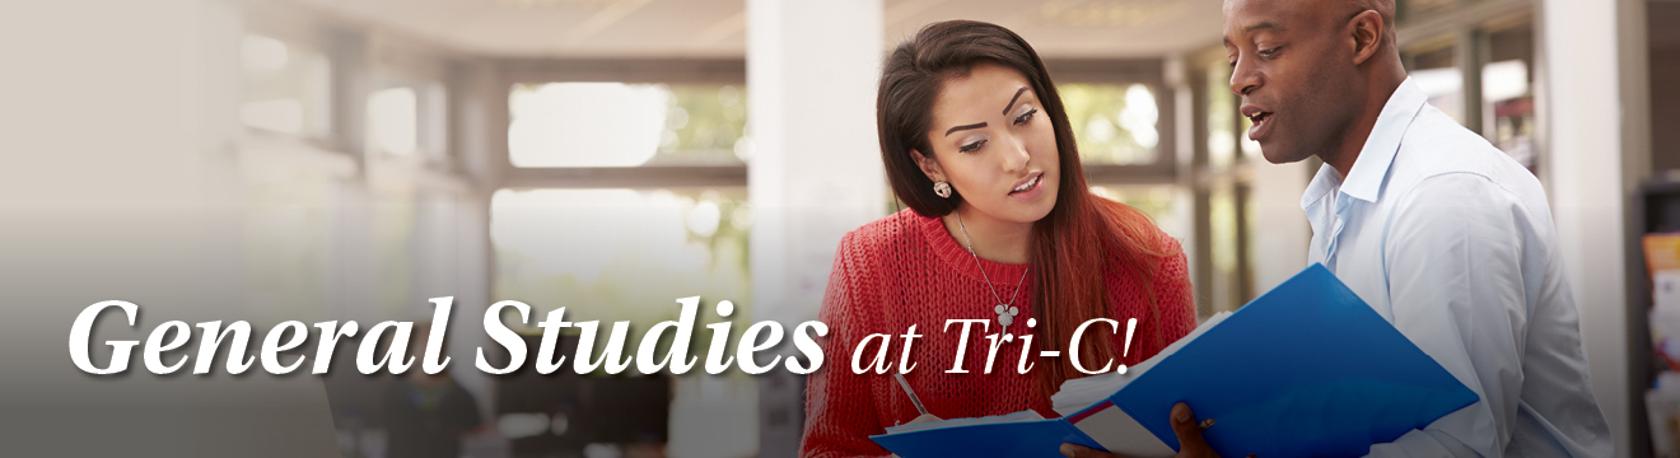 "General Studies at Tri-C!" with image of people studying together.